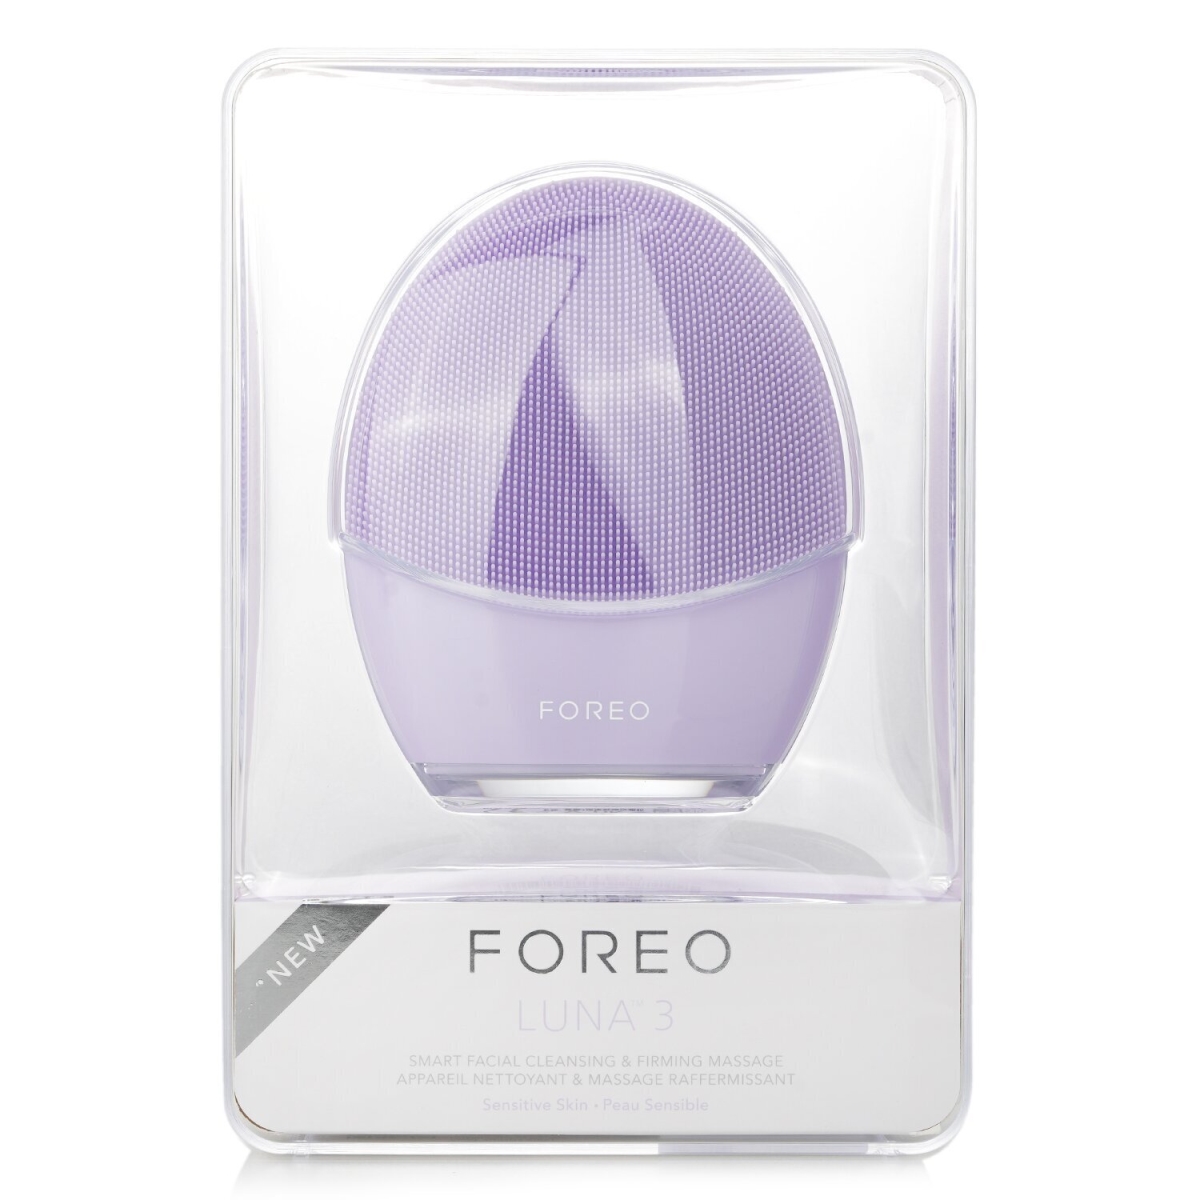 309417 Luna 3 Smart Facial Cleansing & Firming Massager for Sensitive Skin -  Foreo